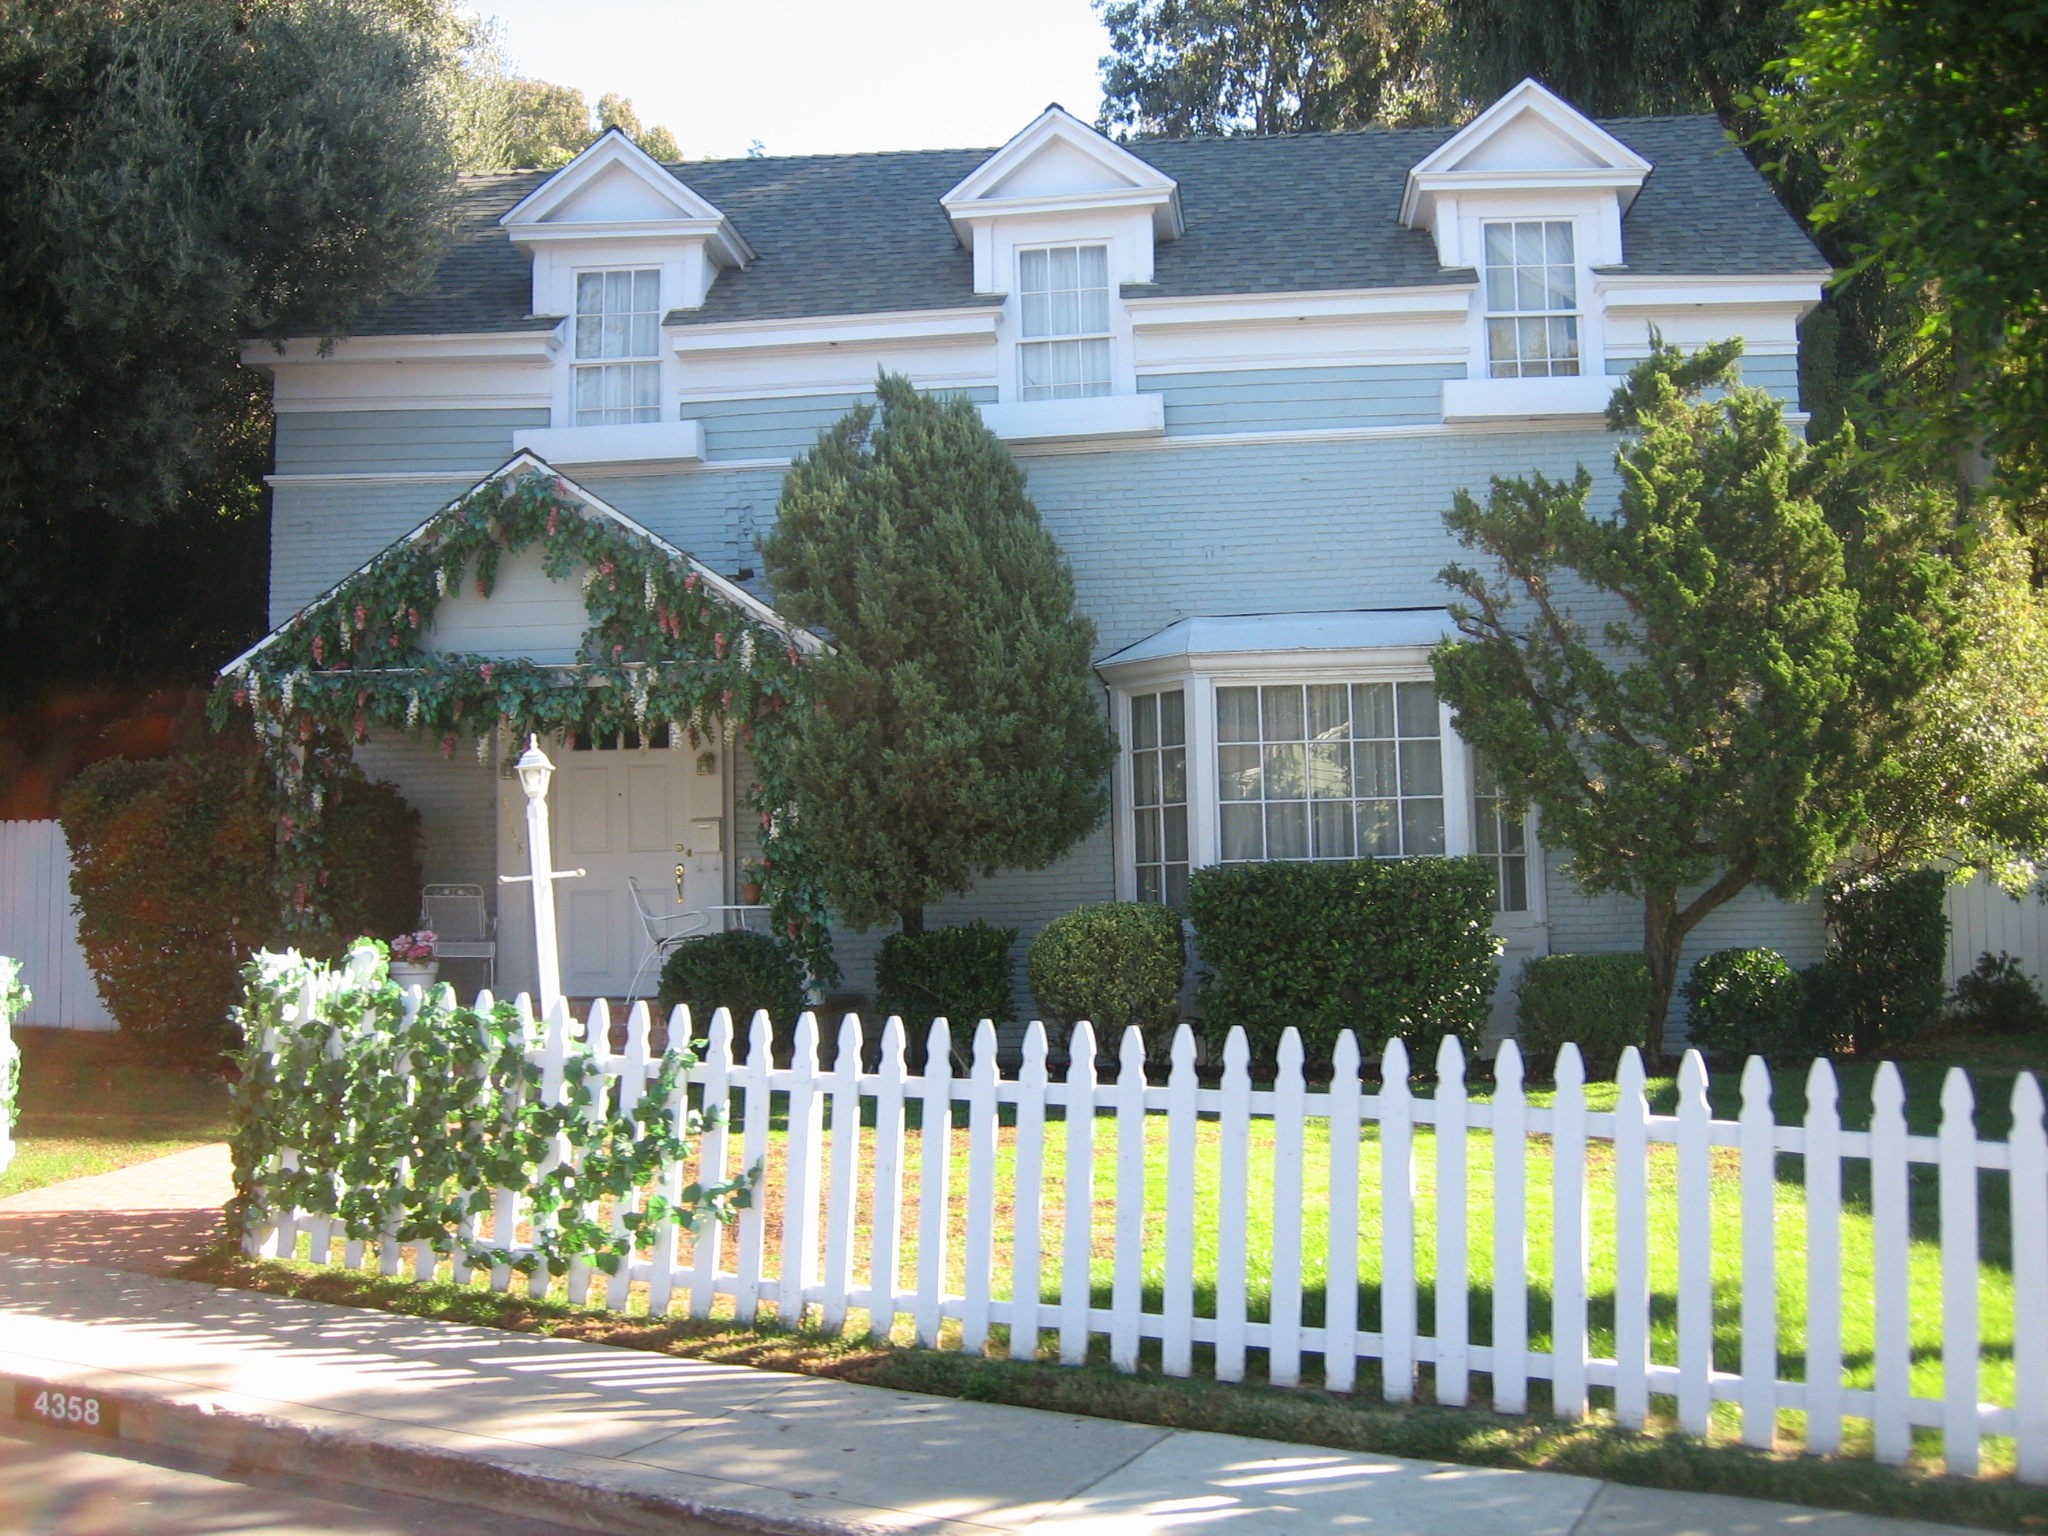 white picket fence in front of an older house